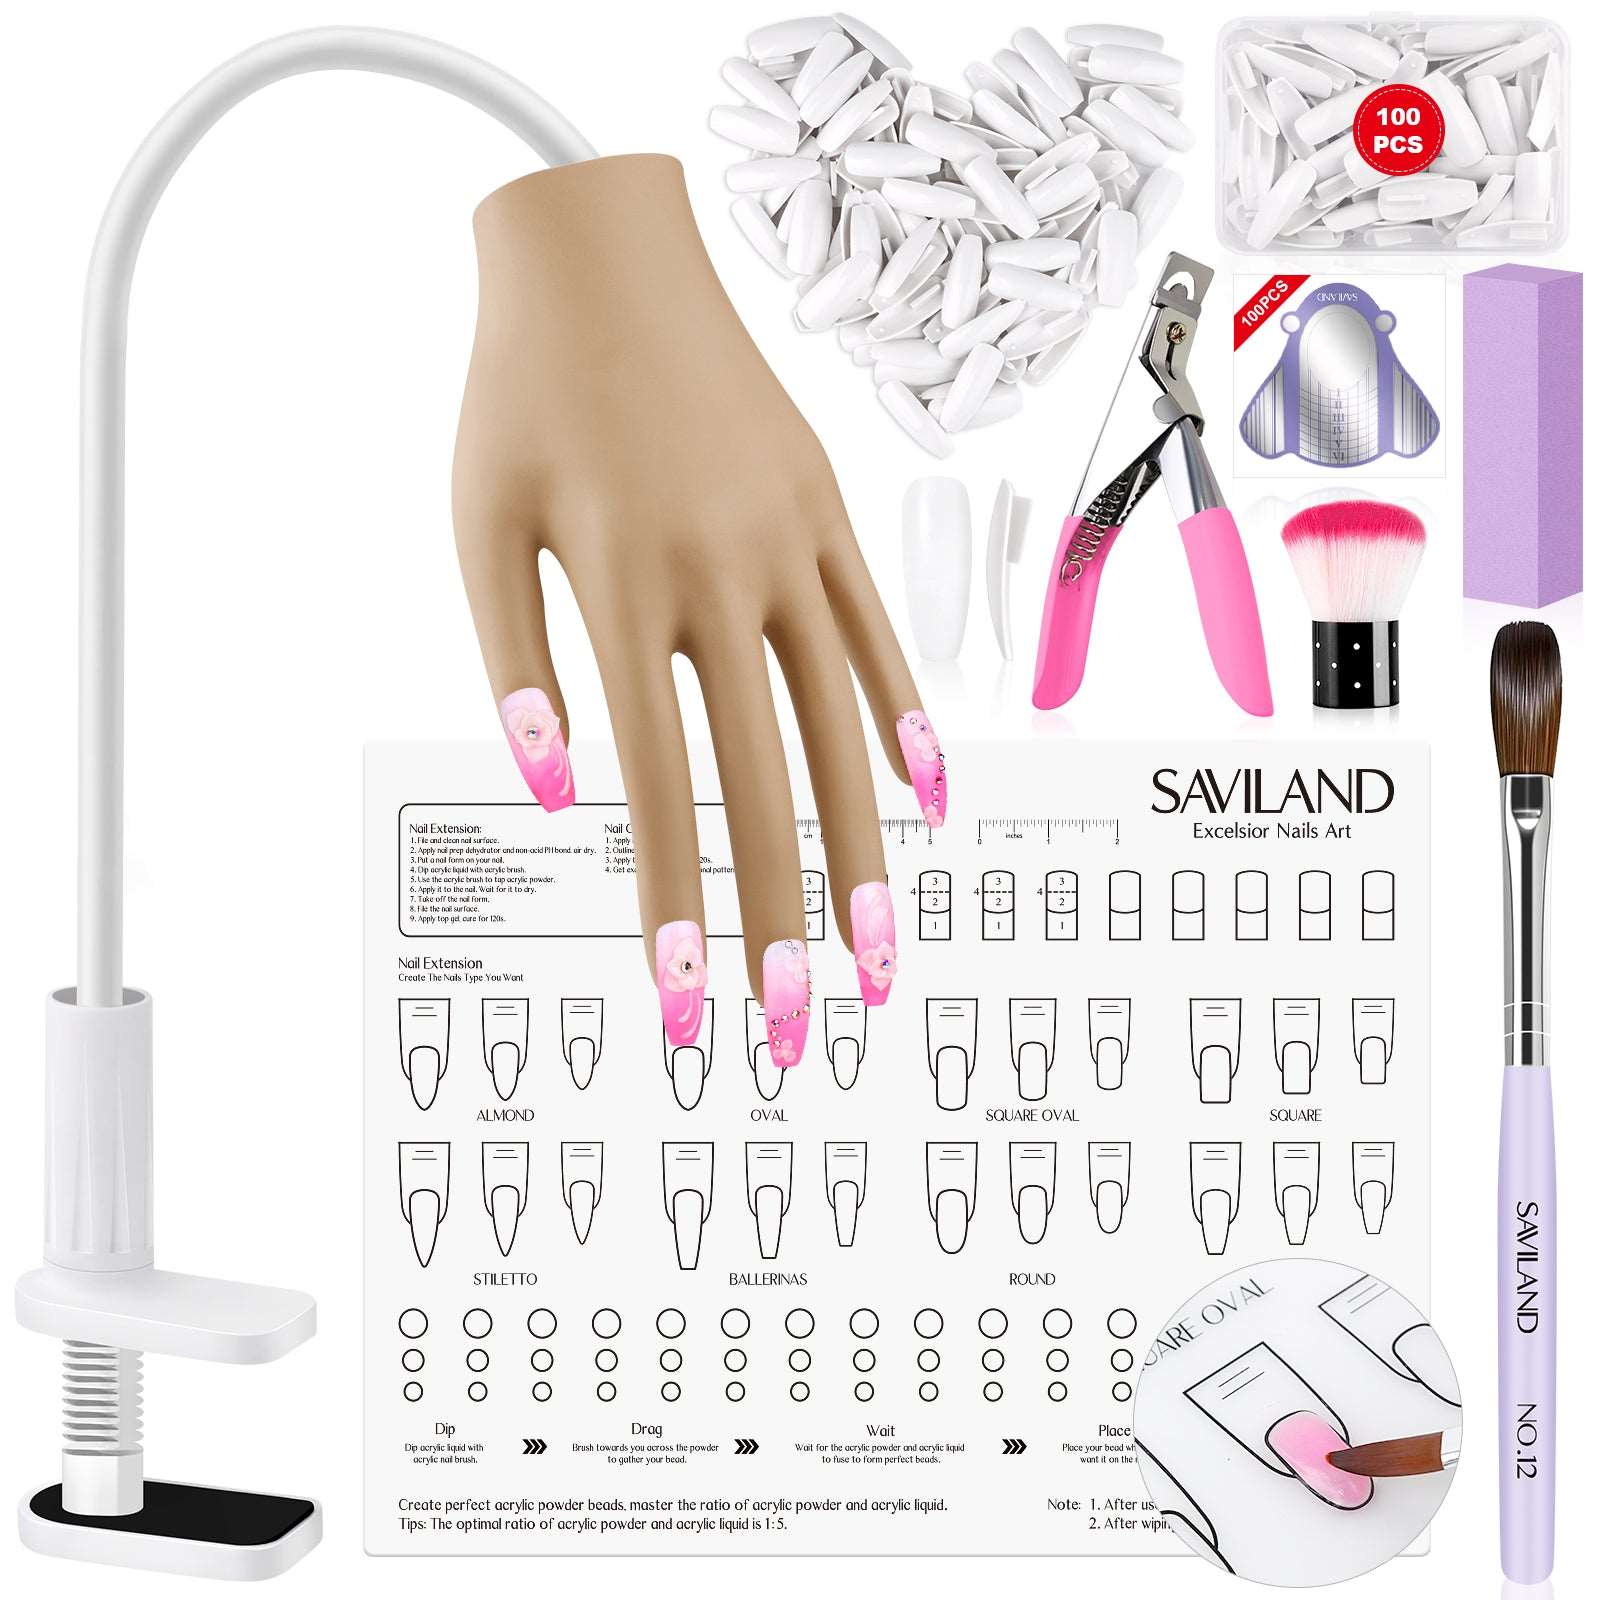 Nail Practice Hand For Acrylic Nails-flexible Nail Training Hand Kit, Fake  Mannequin Model Training Hand With 300 Pcs Nail Tips, Nail Files And Clippe